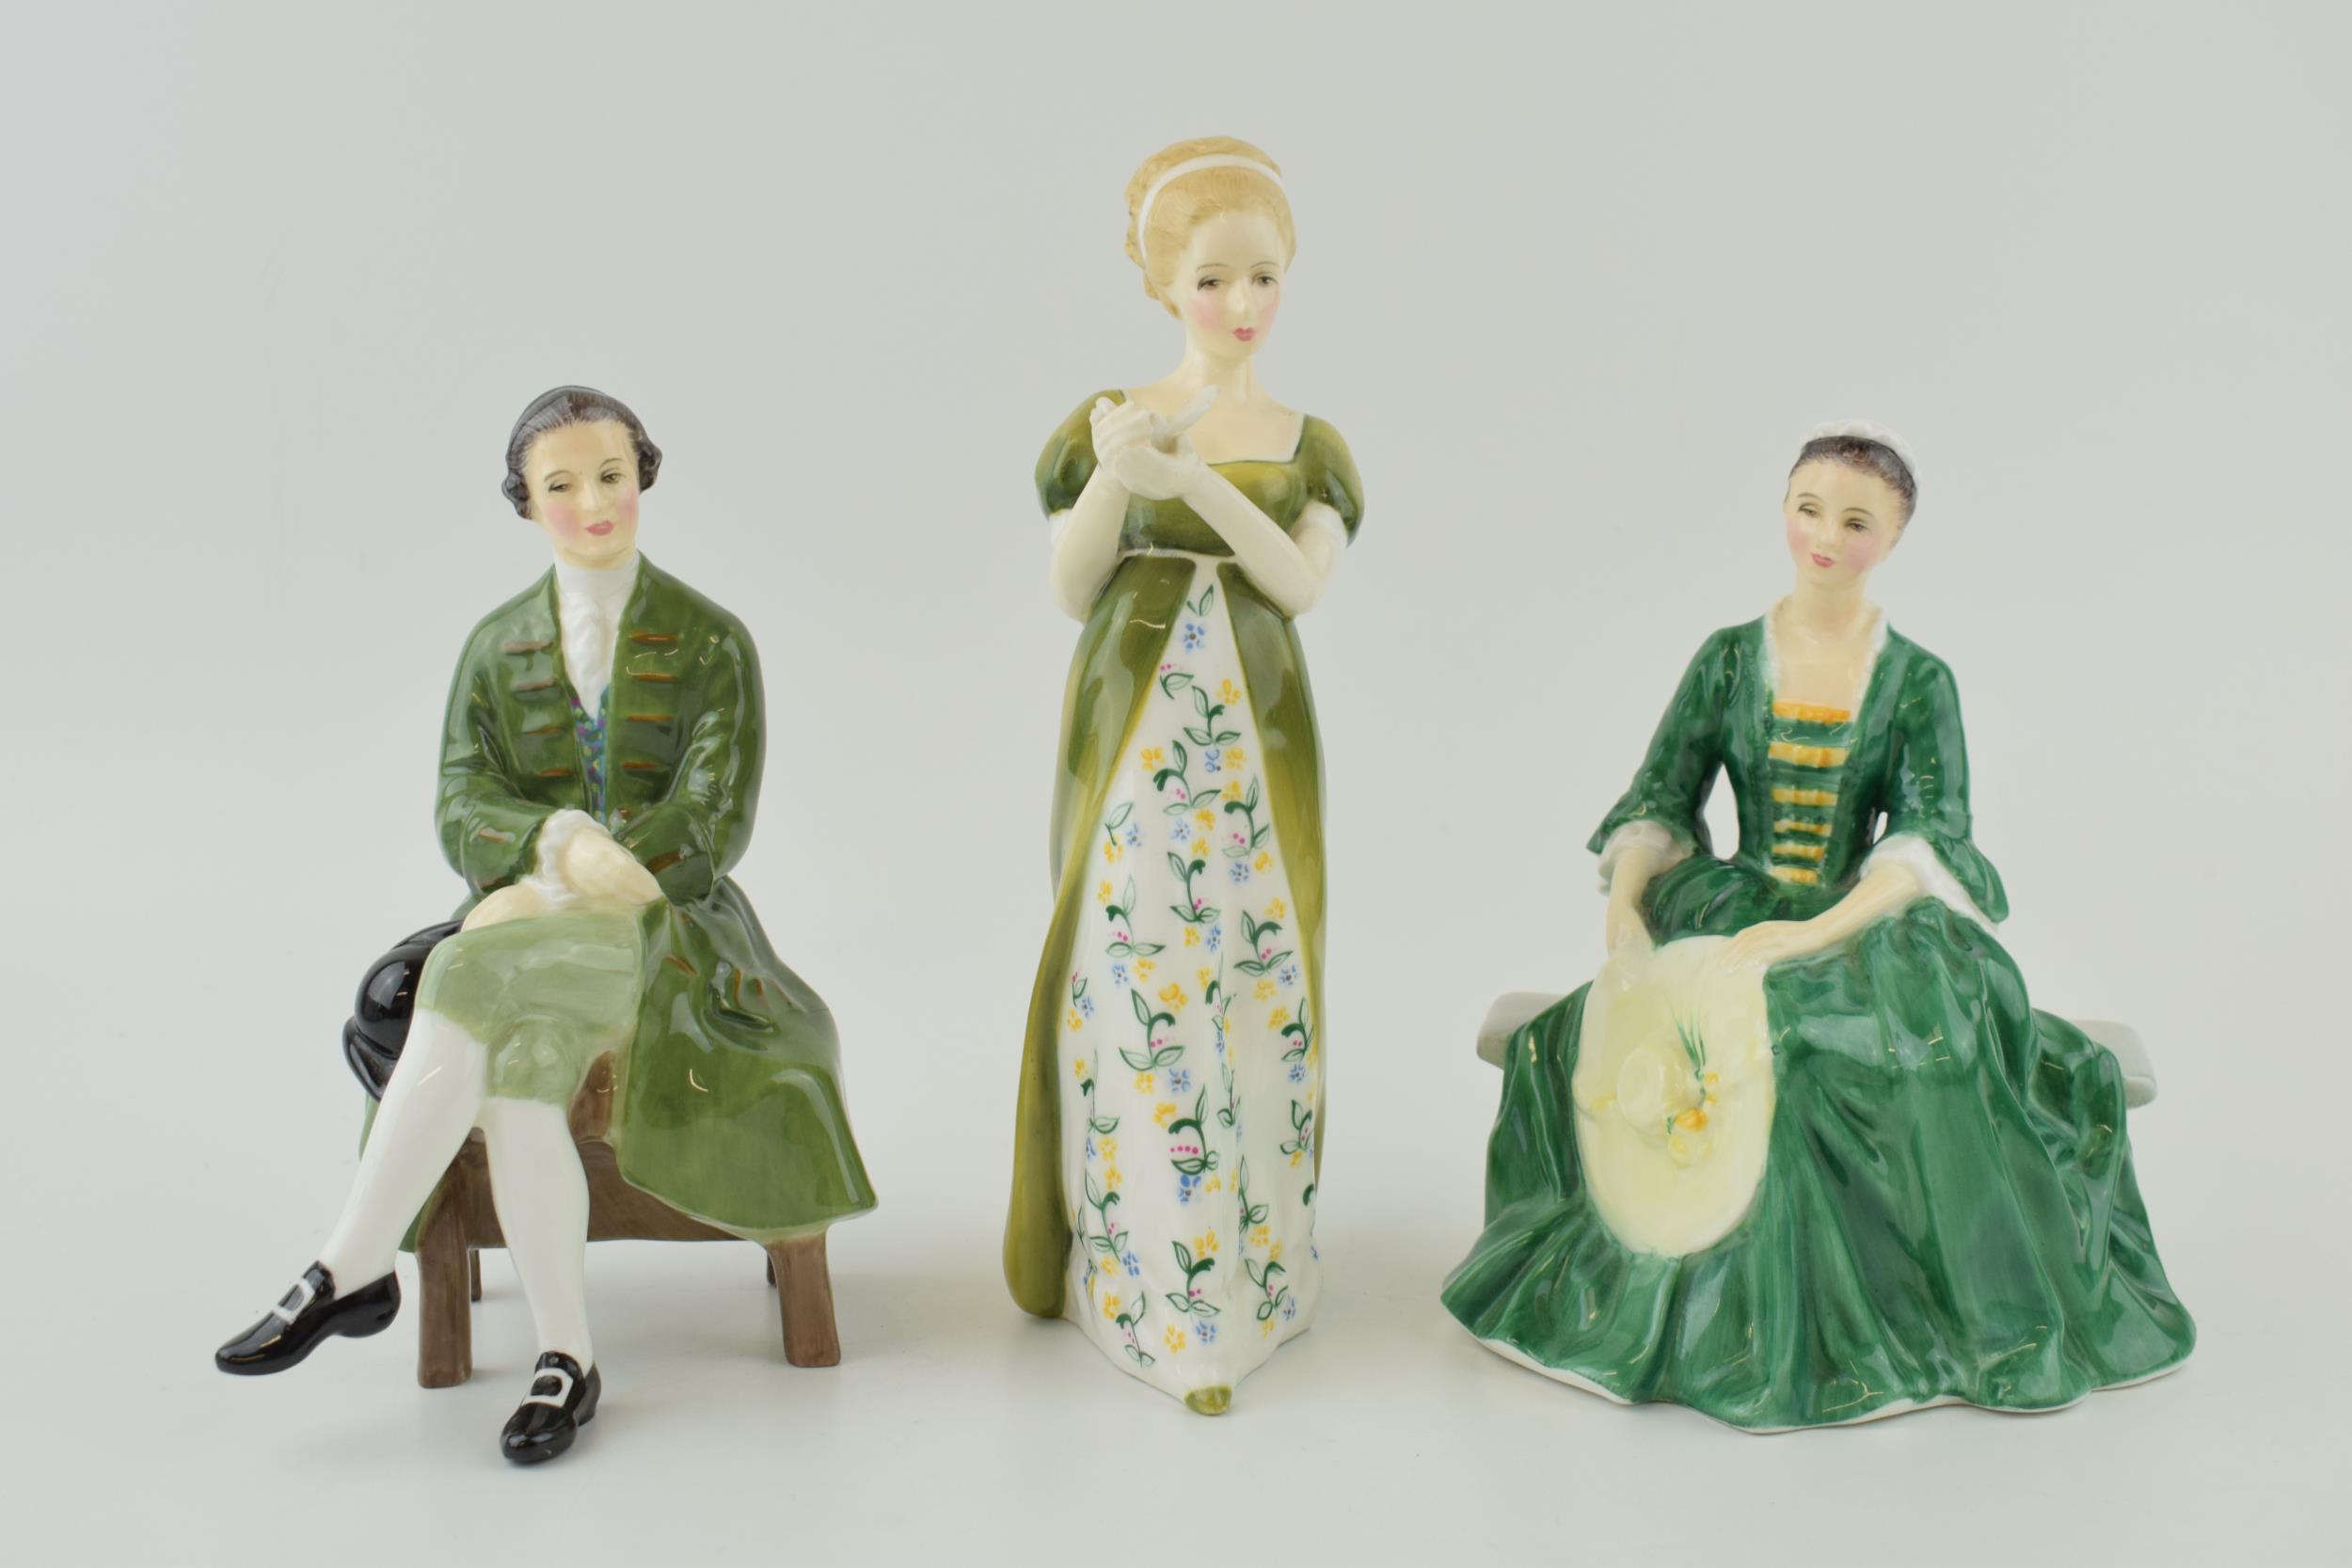 Royal Doulton Figures a/f to include 'A Lady From Williamsburg' HN 2228, 'Veneta HN 2722' and 'A